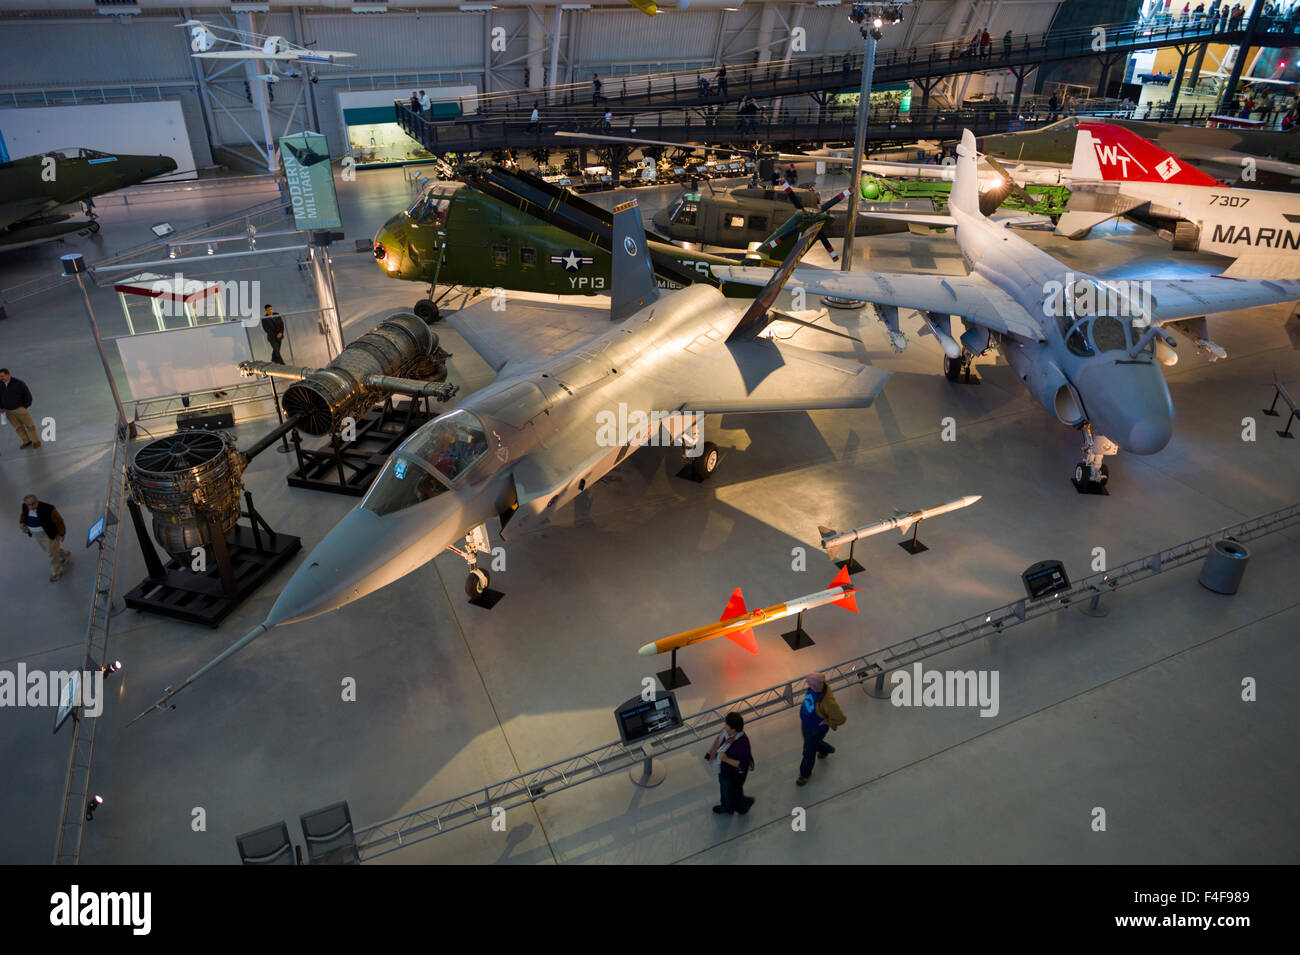 USA, Virginia, Herndon, National Air and Space Museum, Steven F. Udvar-Hazy Center, air museum, US Aircraft, F-35 Lightning II and EA-6B Prowler Stock Photo